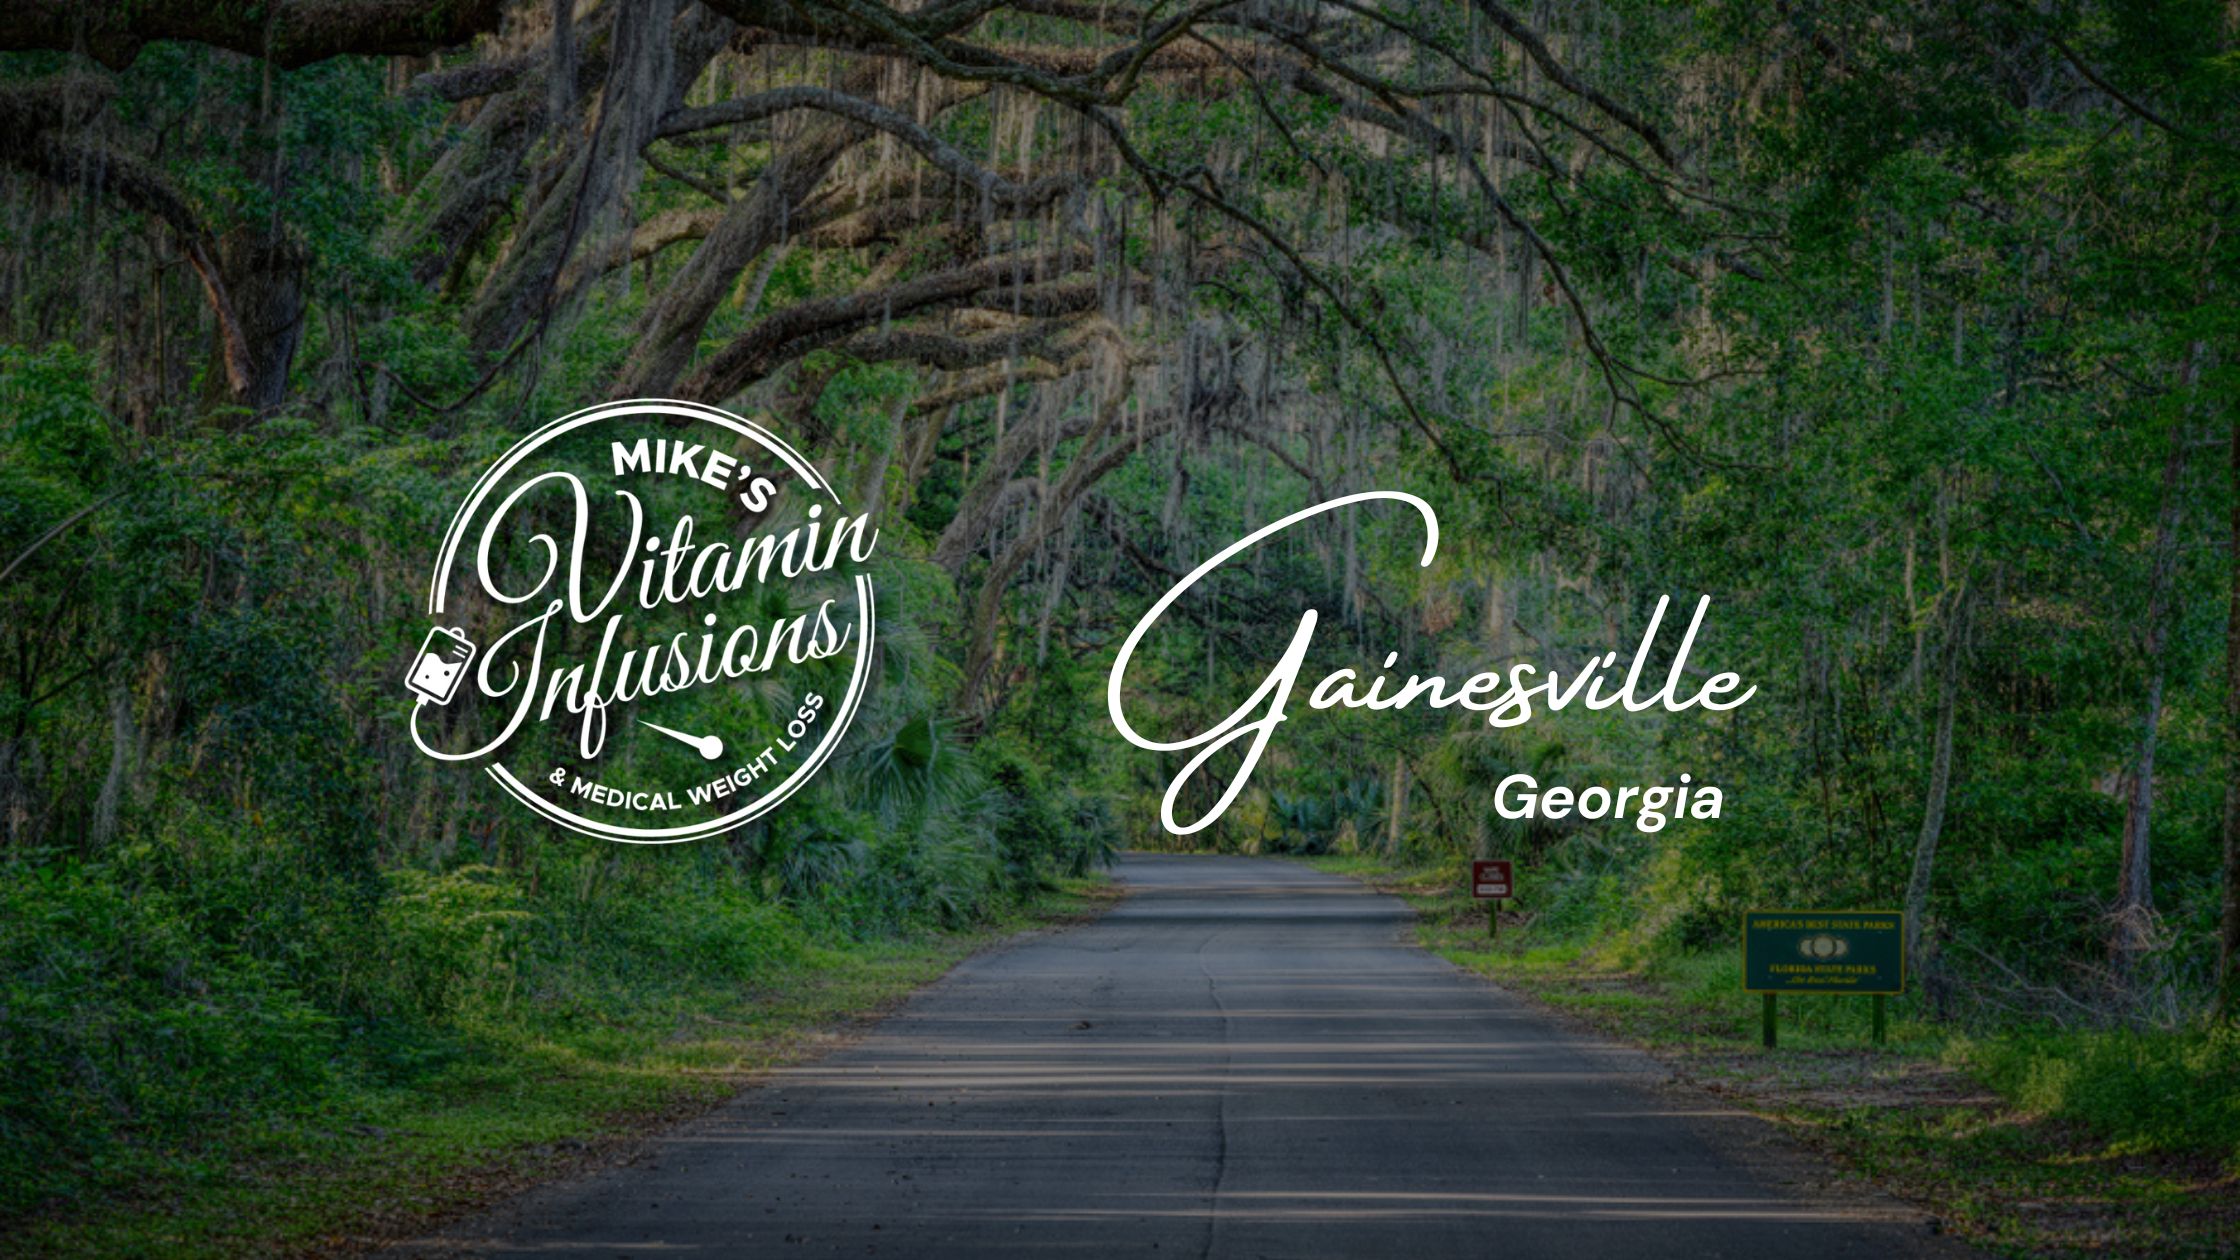 Image of a road with green trees in Gainesville Georgia with the mike's vitamin infusions logo